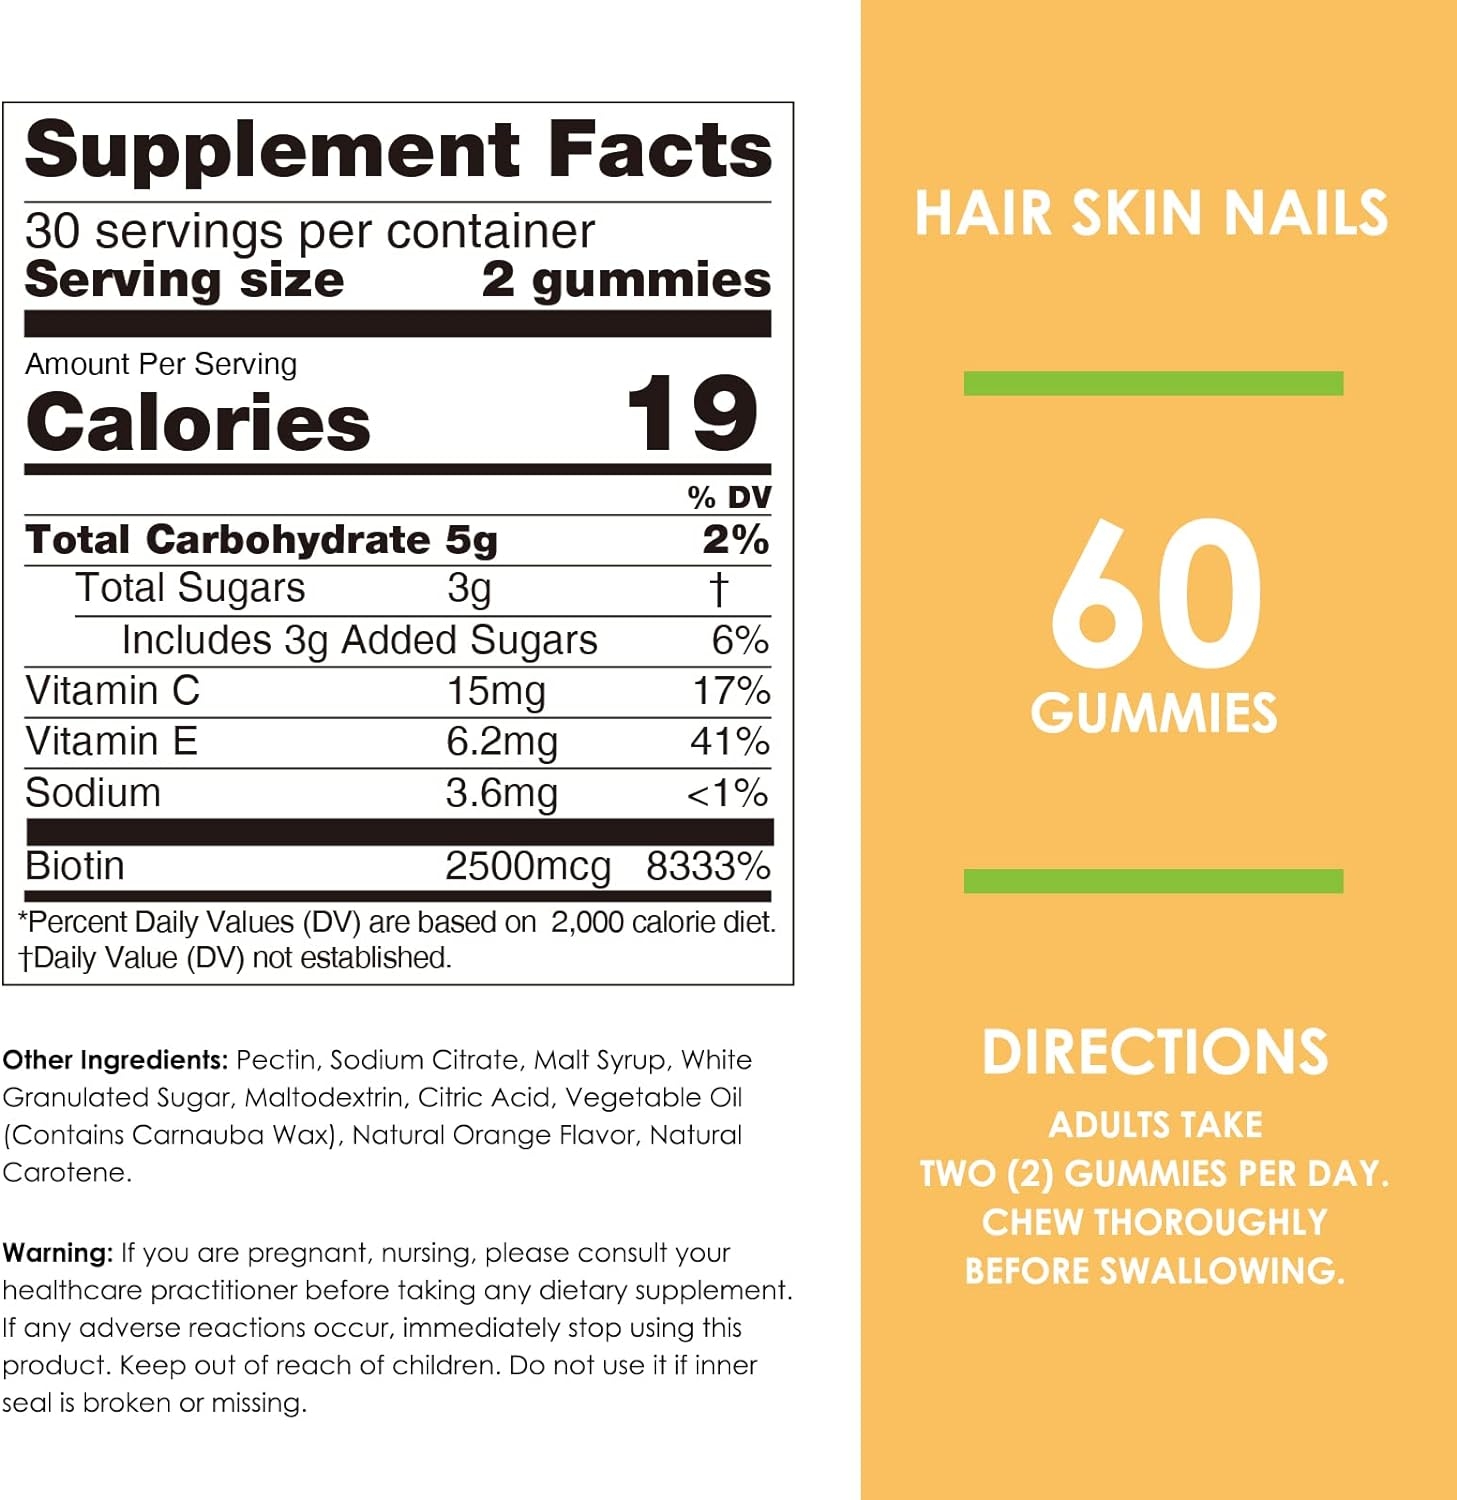 Nature's Key Biotin Gummies with Vitamin C and E, Support Hair Nails Growth & Beautiful Skin for Women Men and Kids, Vegan, Orange Flavors 60 Count